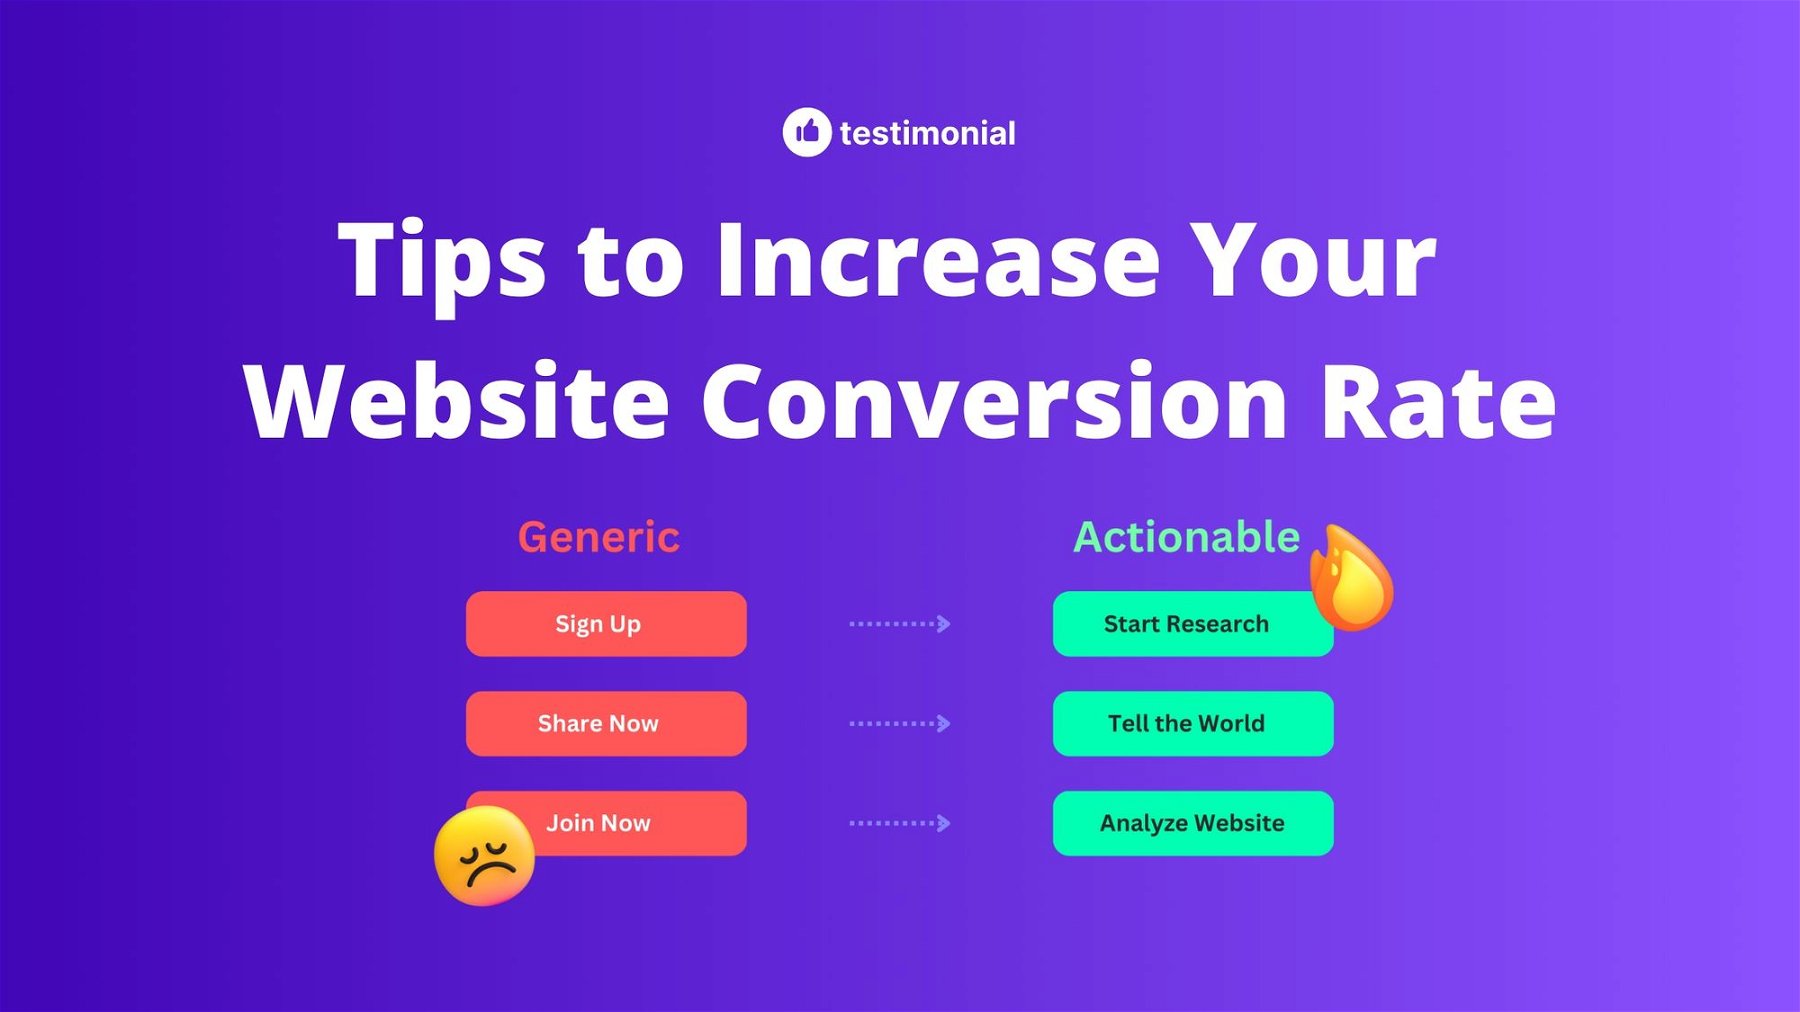 5 Easy Tips to Increase Your Website Conversion Rate